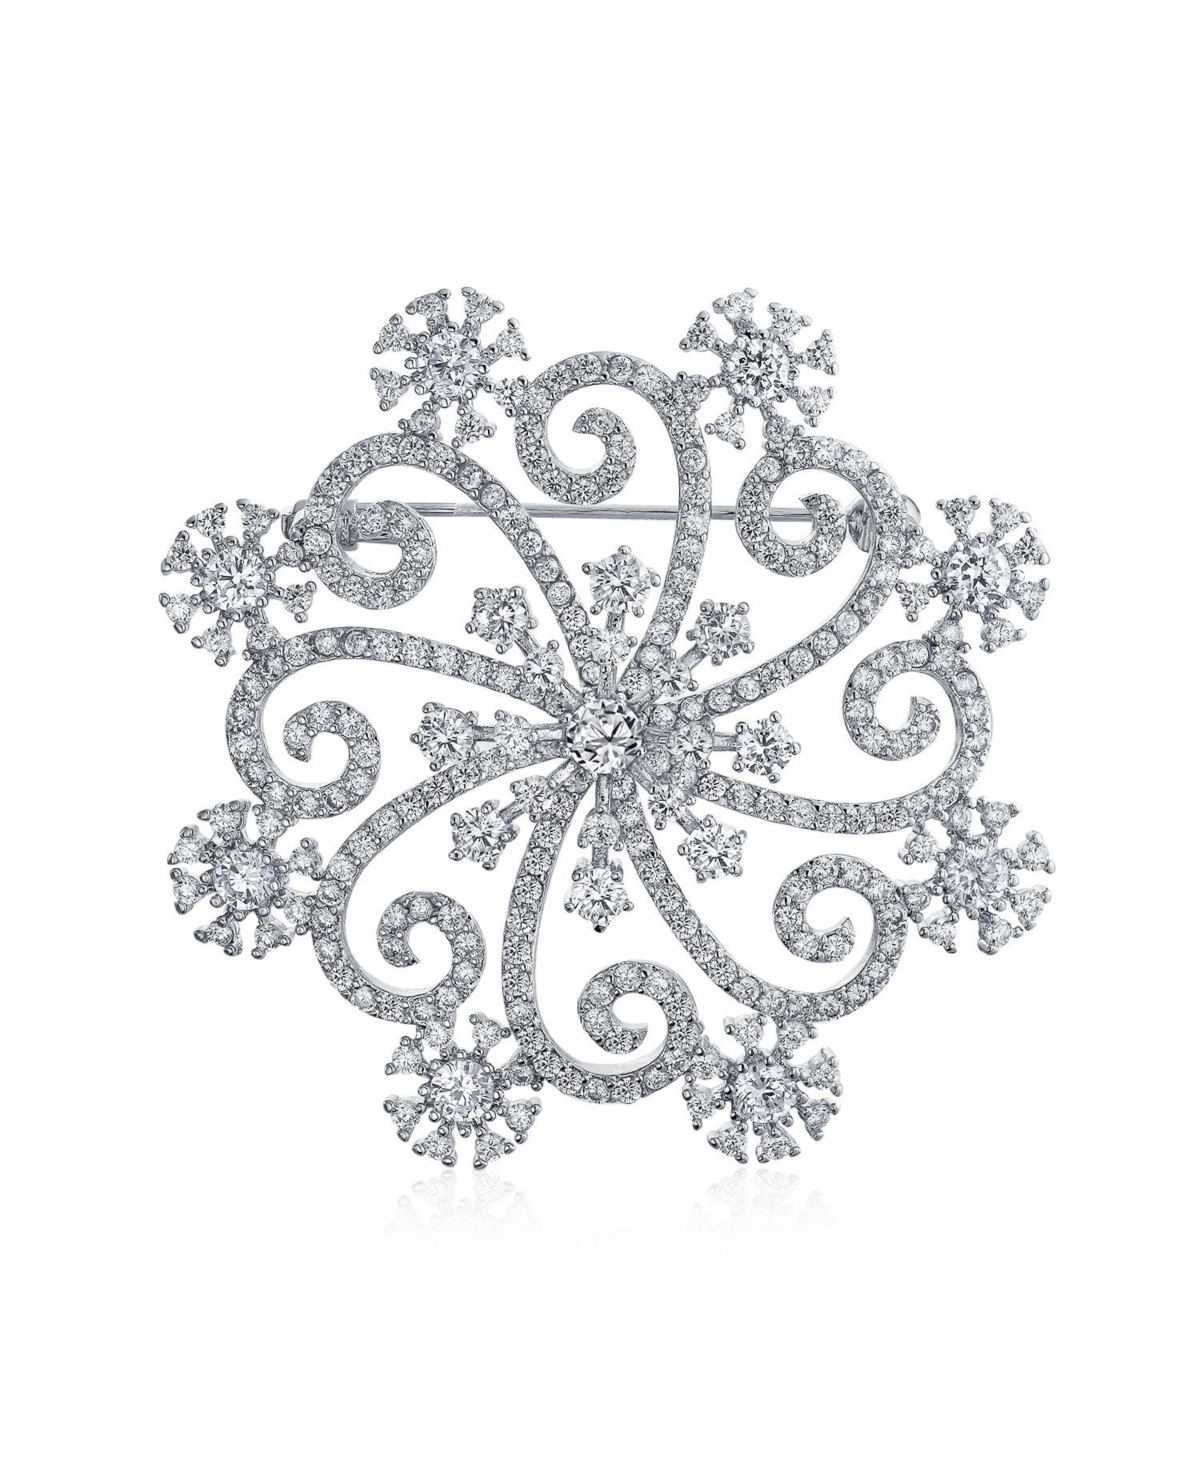 Large Frozen Winter Swirl Holiday Party Cz Cubic Zirconia Scarf Christmas Statement Snowflake Brooch Pin For Women - Silver tone